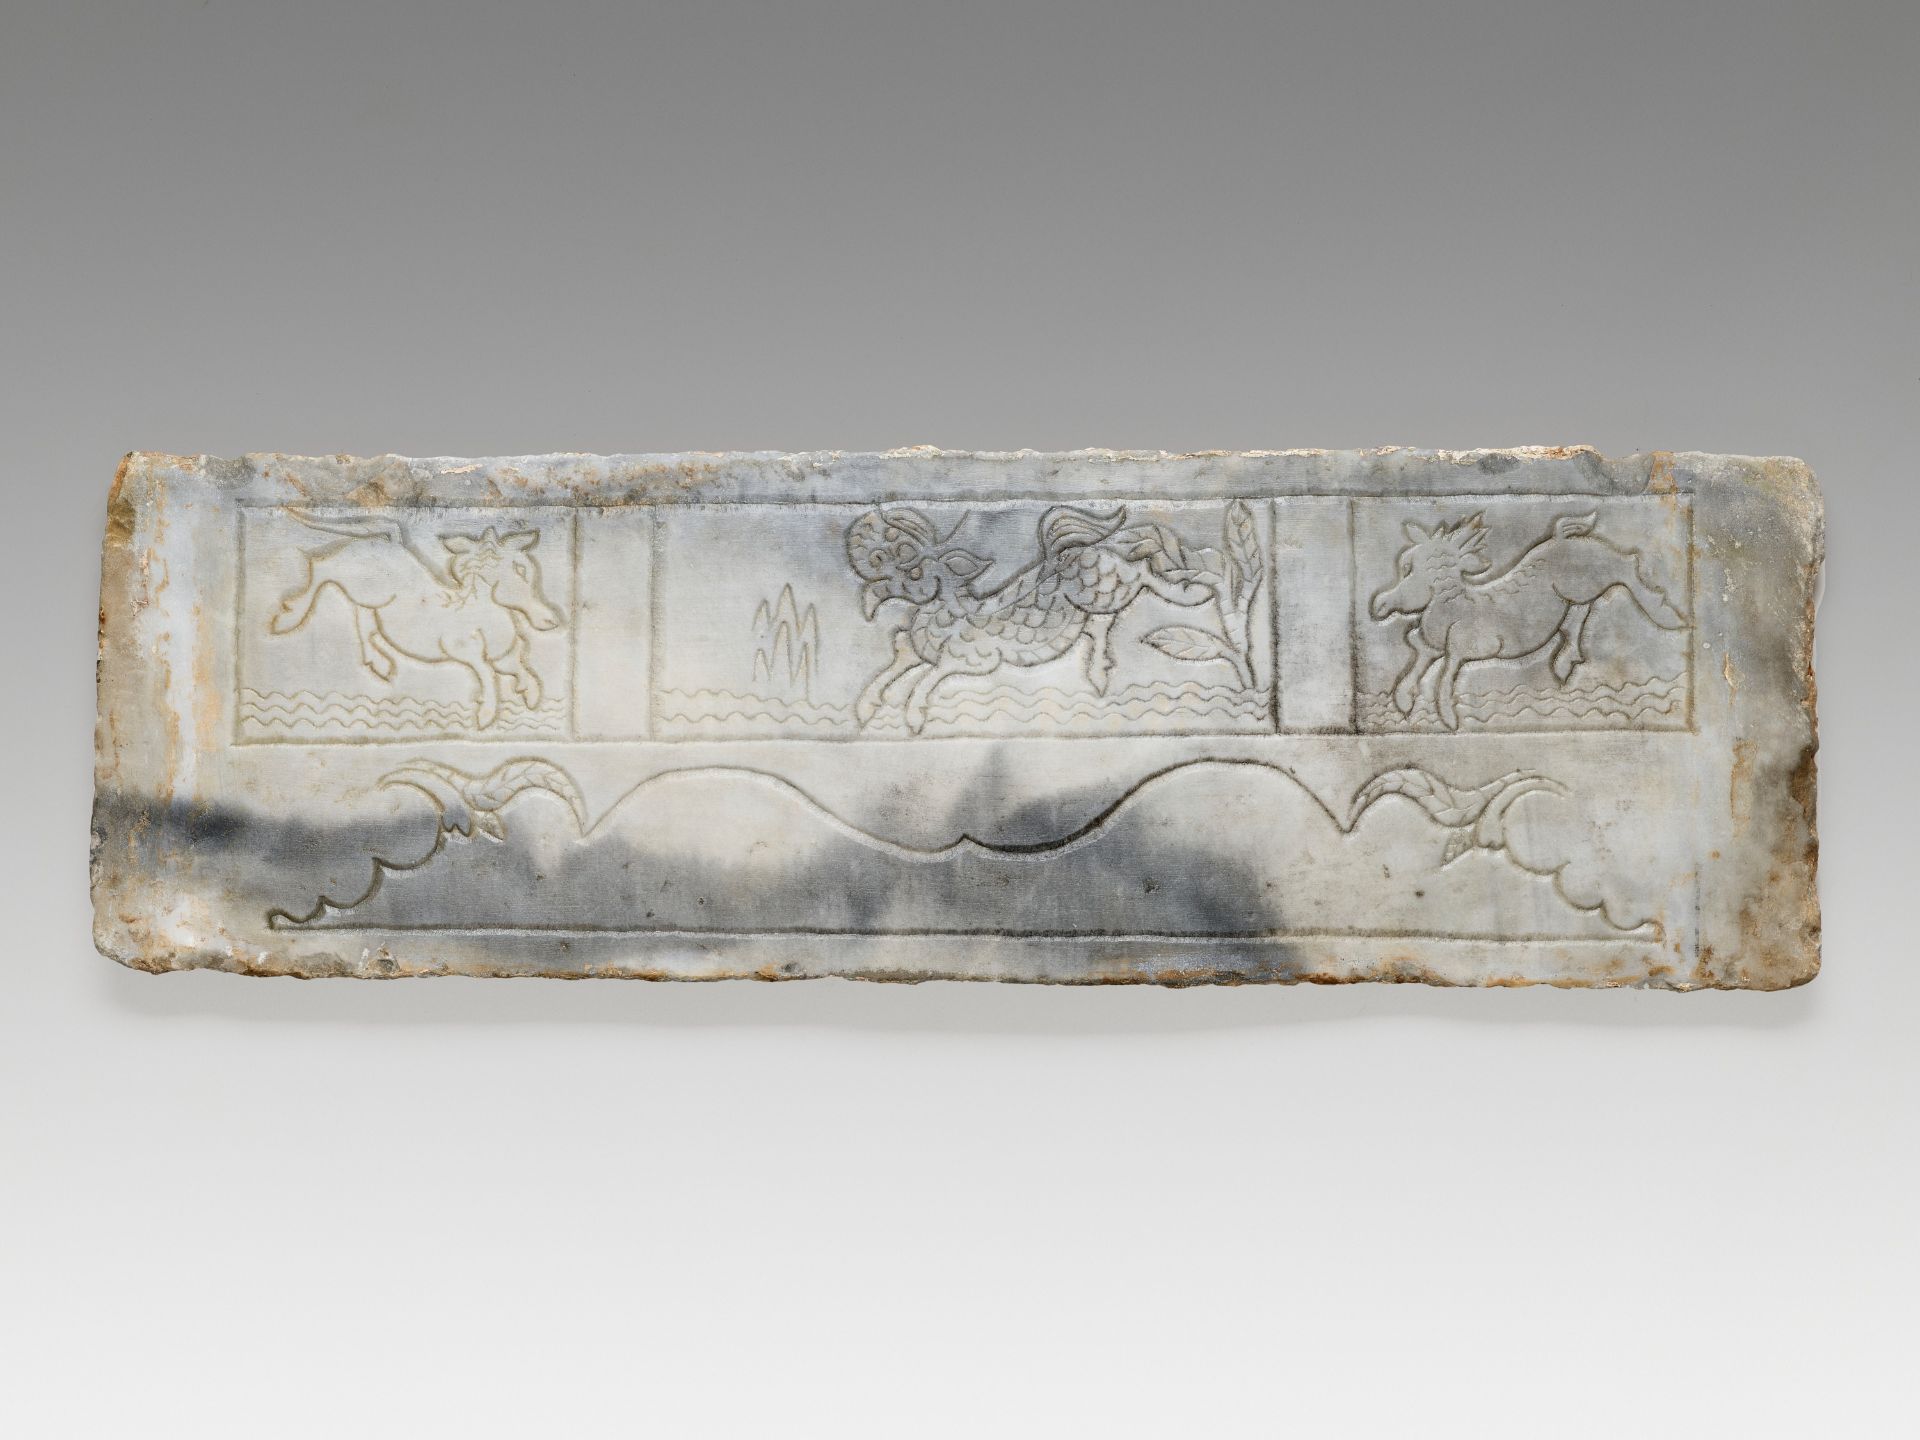 TWO 'MYTHICAL BEAST' MARBLE PANELS, FRAGMENTS OF A FUNERARY STRUCTURE, TANG TO JIN DYNASTY - Bild 5 aus 9